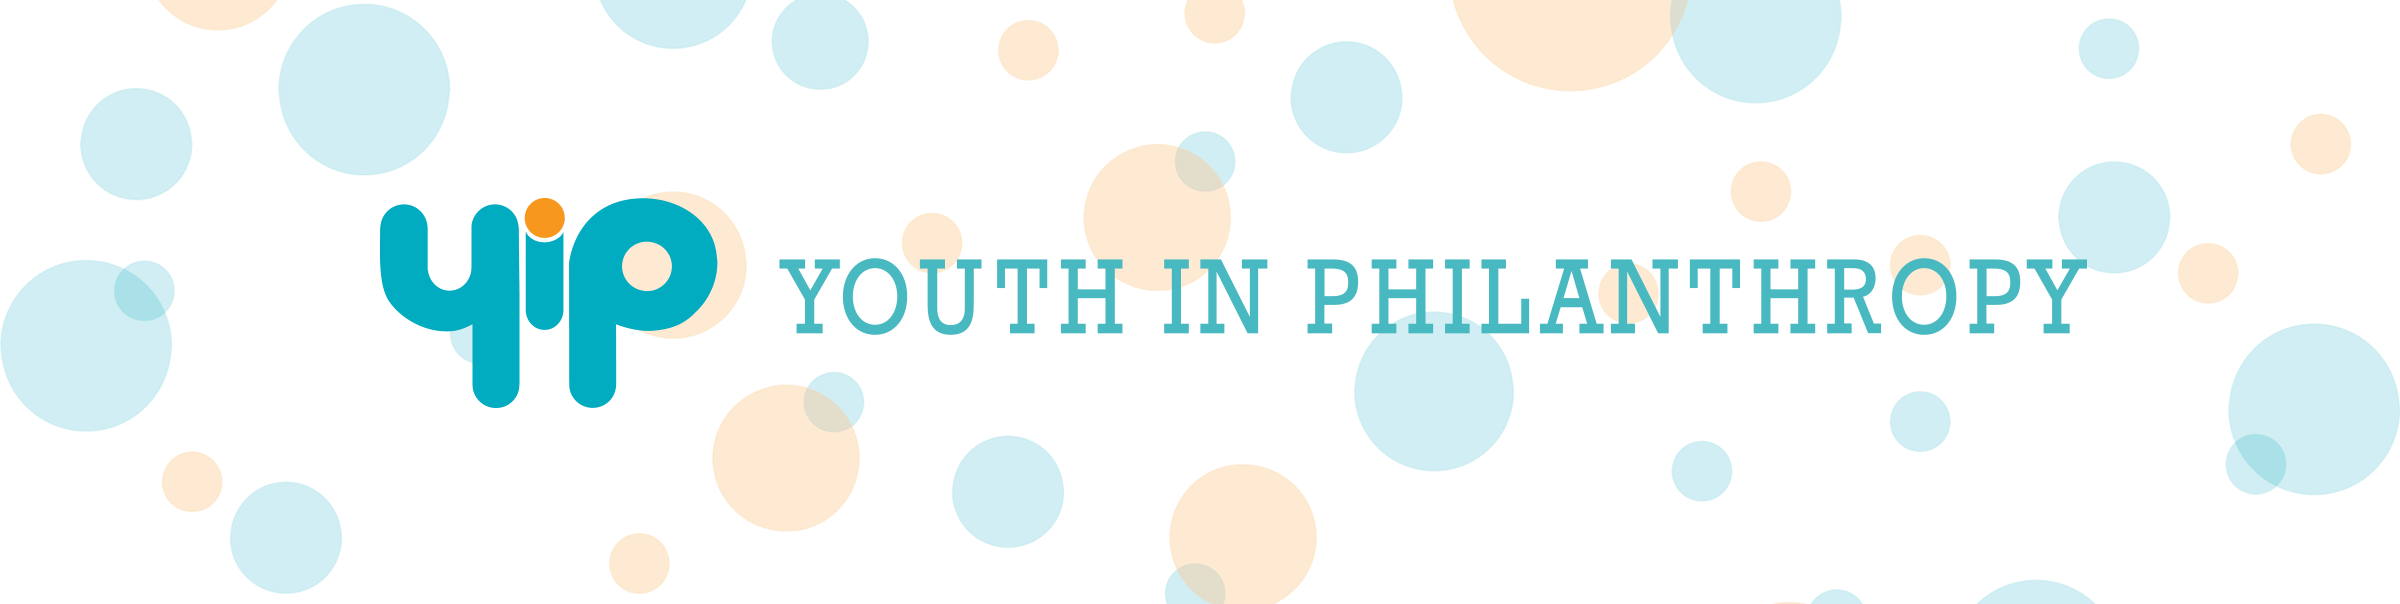 Youth In Philanthropy